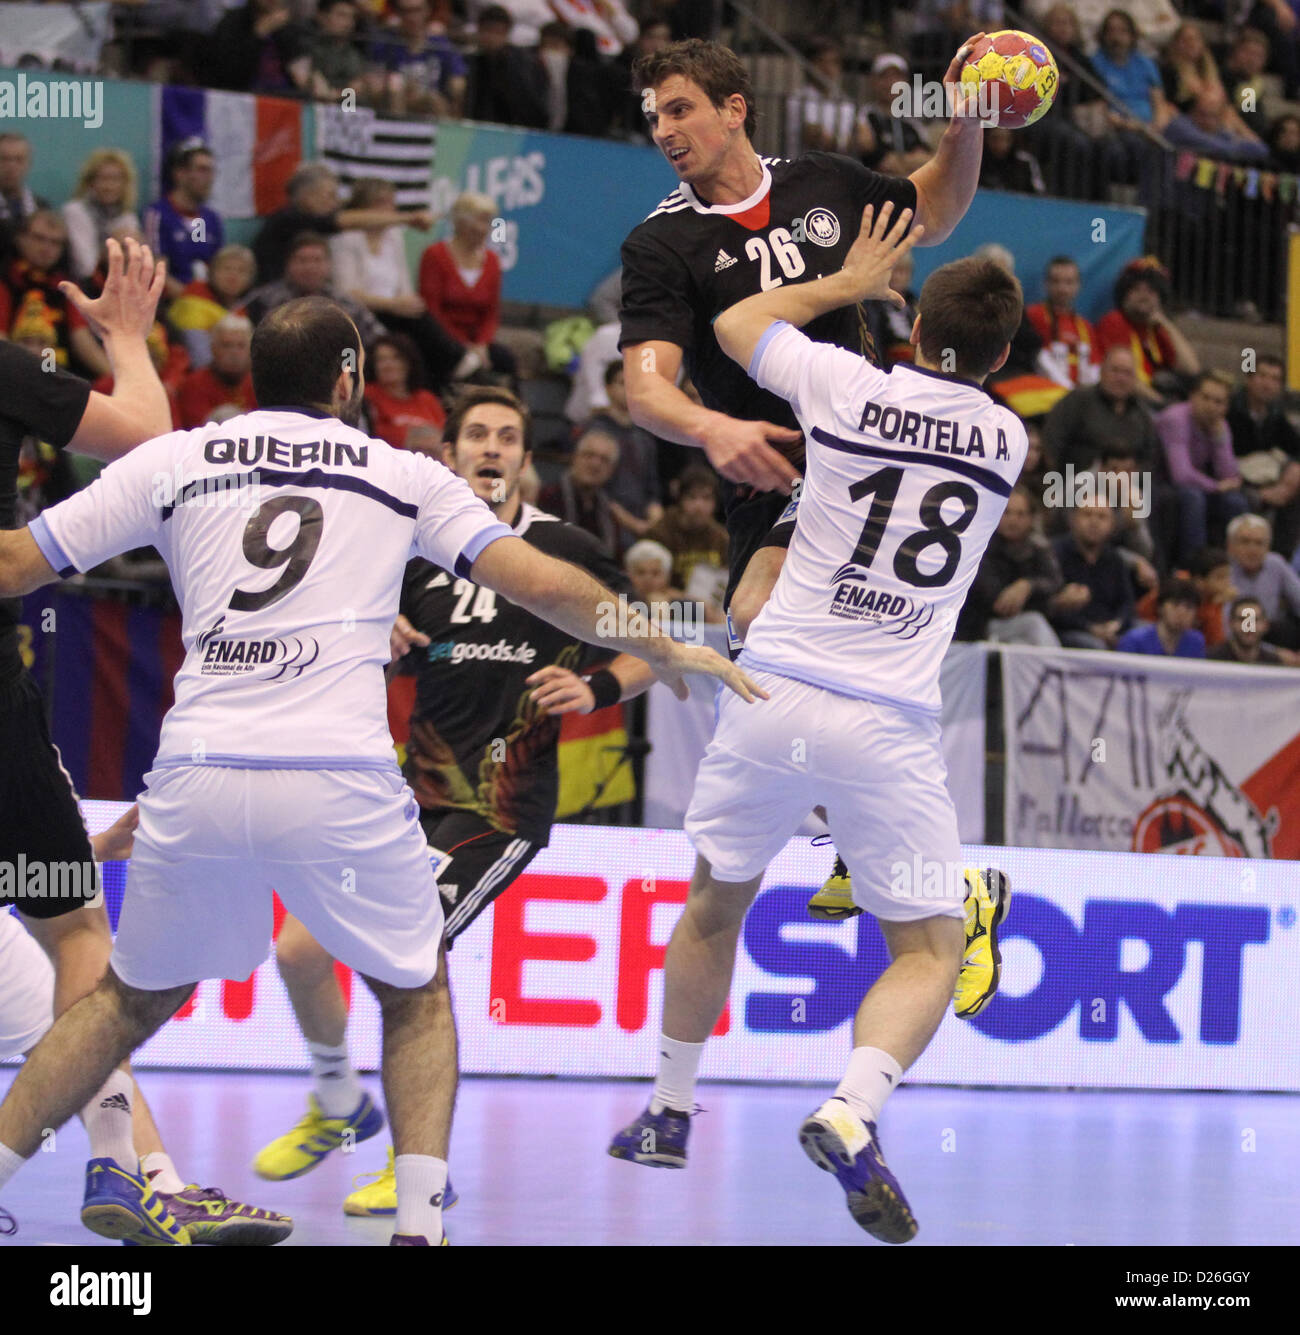 15.01.2013 Granollers, Spain. IHF men's world championship, prelimanary round. Picture showsAdrian Pfahl    in action during game between Germany versus  Argentina at Palau d'esports de Granollers Stock Photo